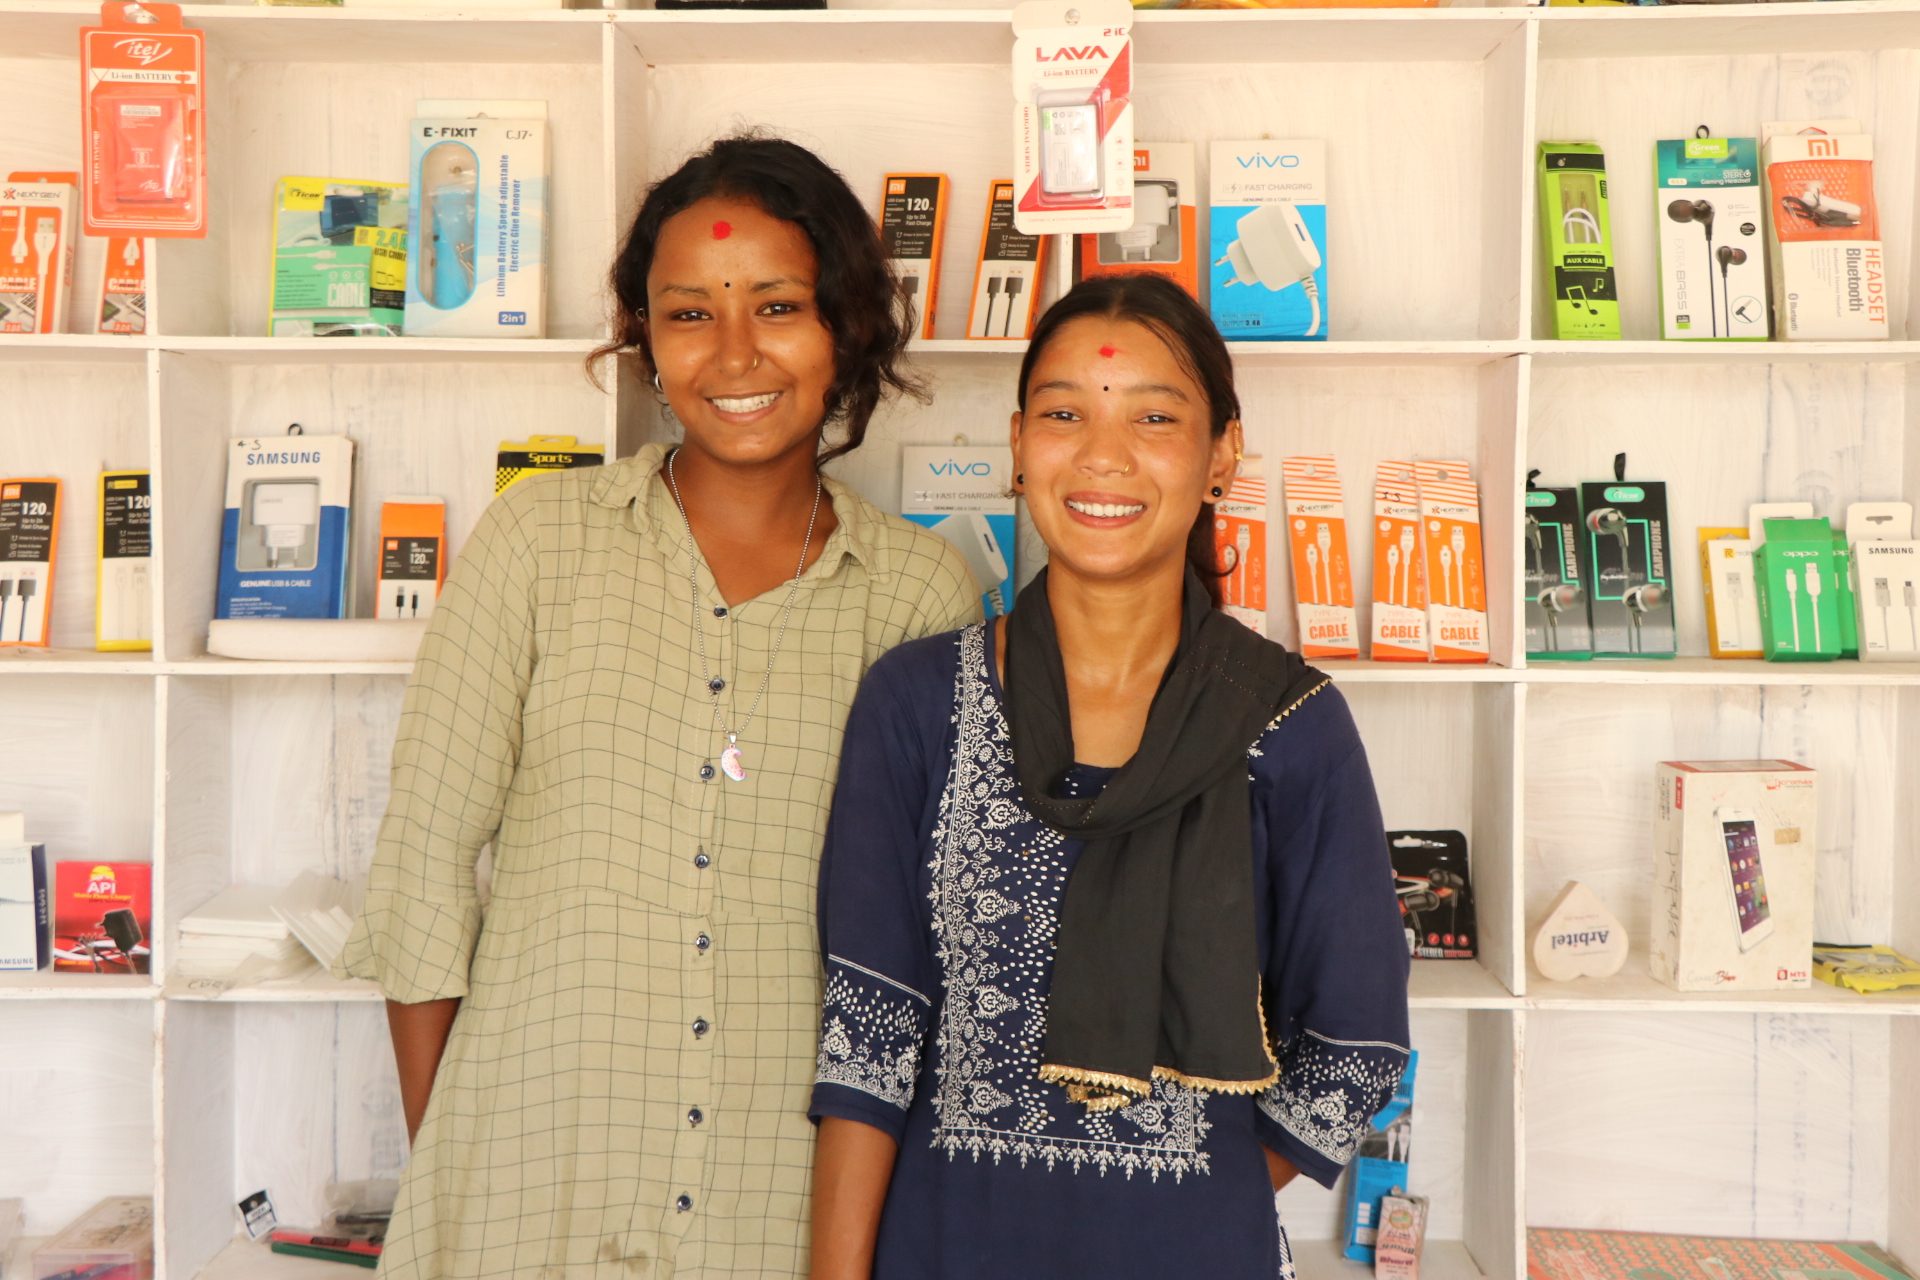 Ashmita and Anjila in front of the shelves in their mobile repair center. 